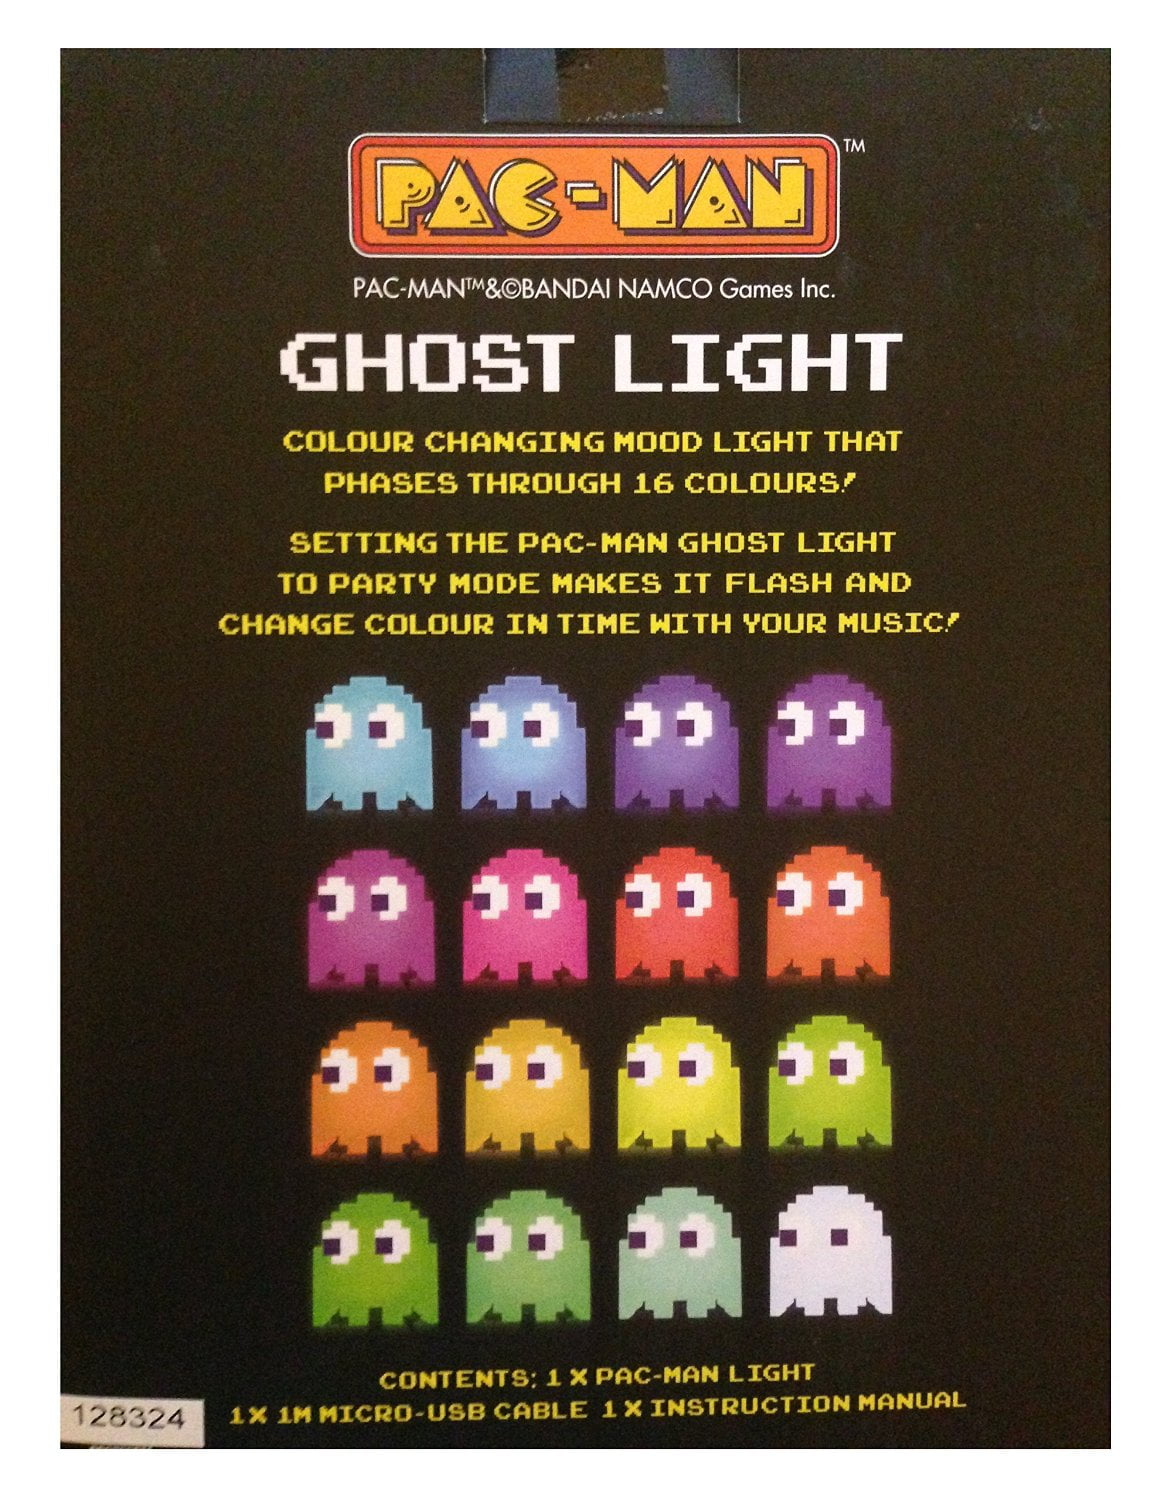 Novelty Pac-Man GHOST Lamp